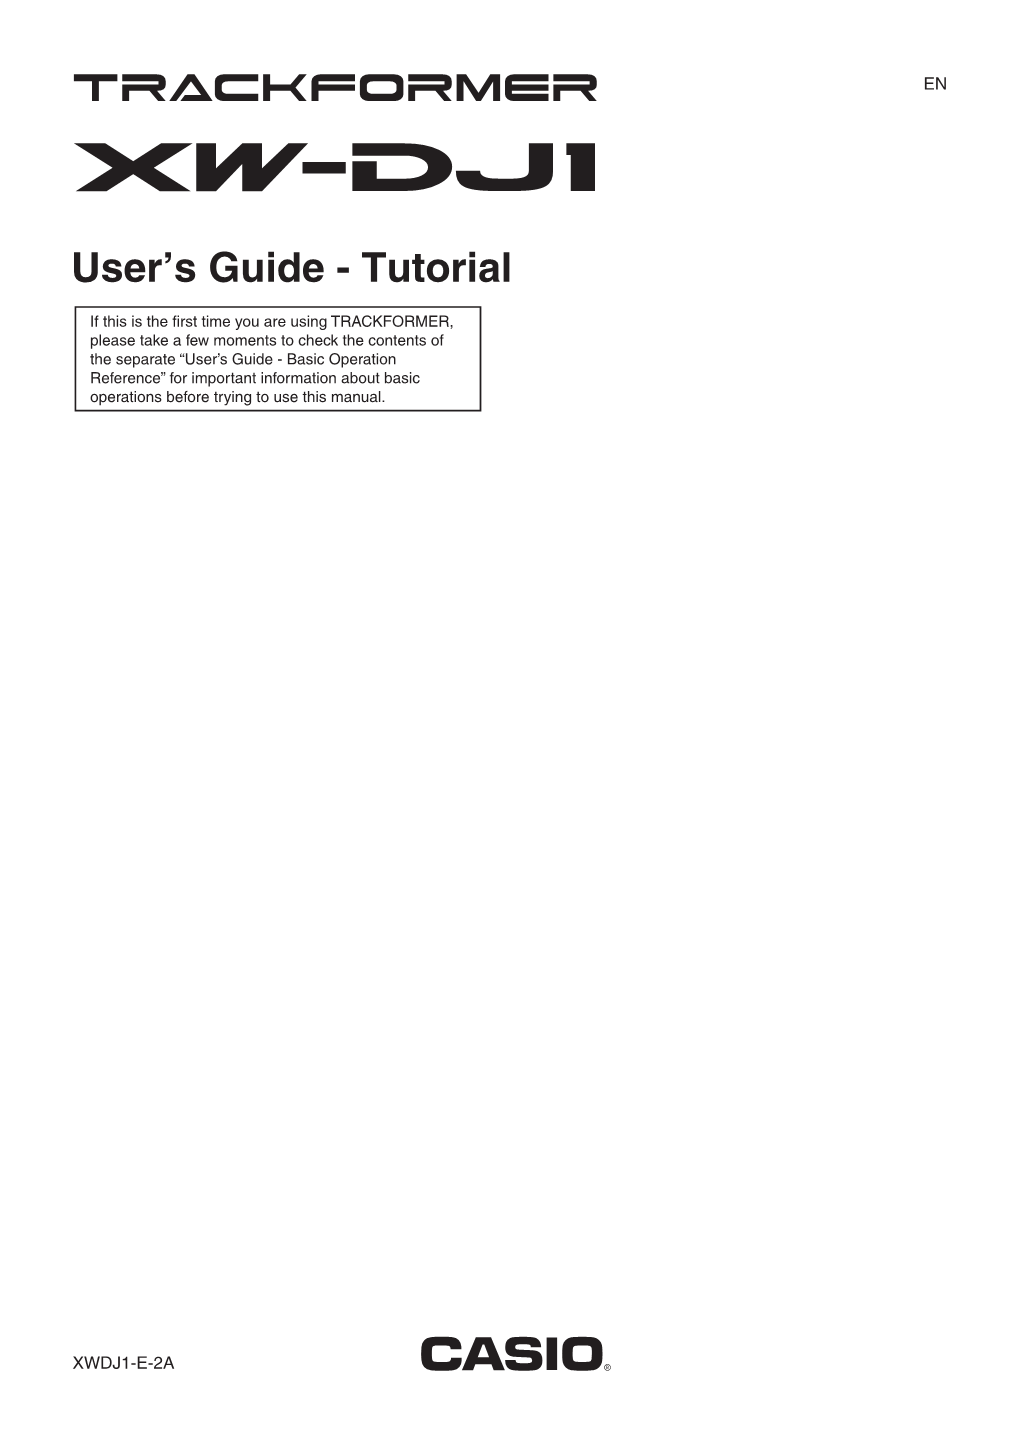 User's Guide - Basic Operation Reference” for Important Information About Basic Operations Before Trying to Use This Manual